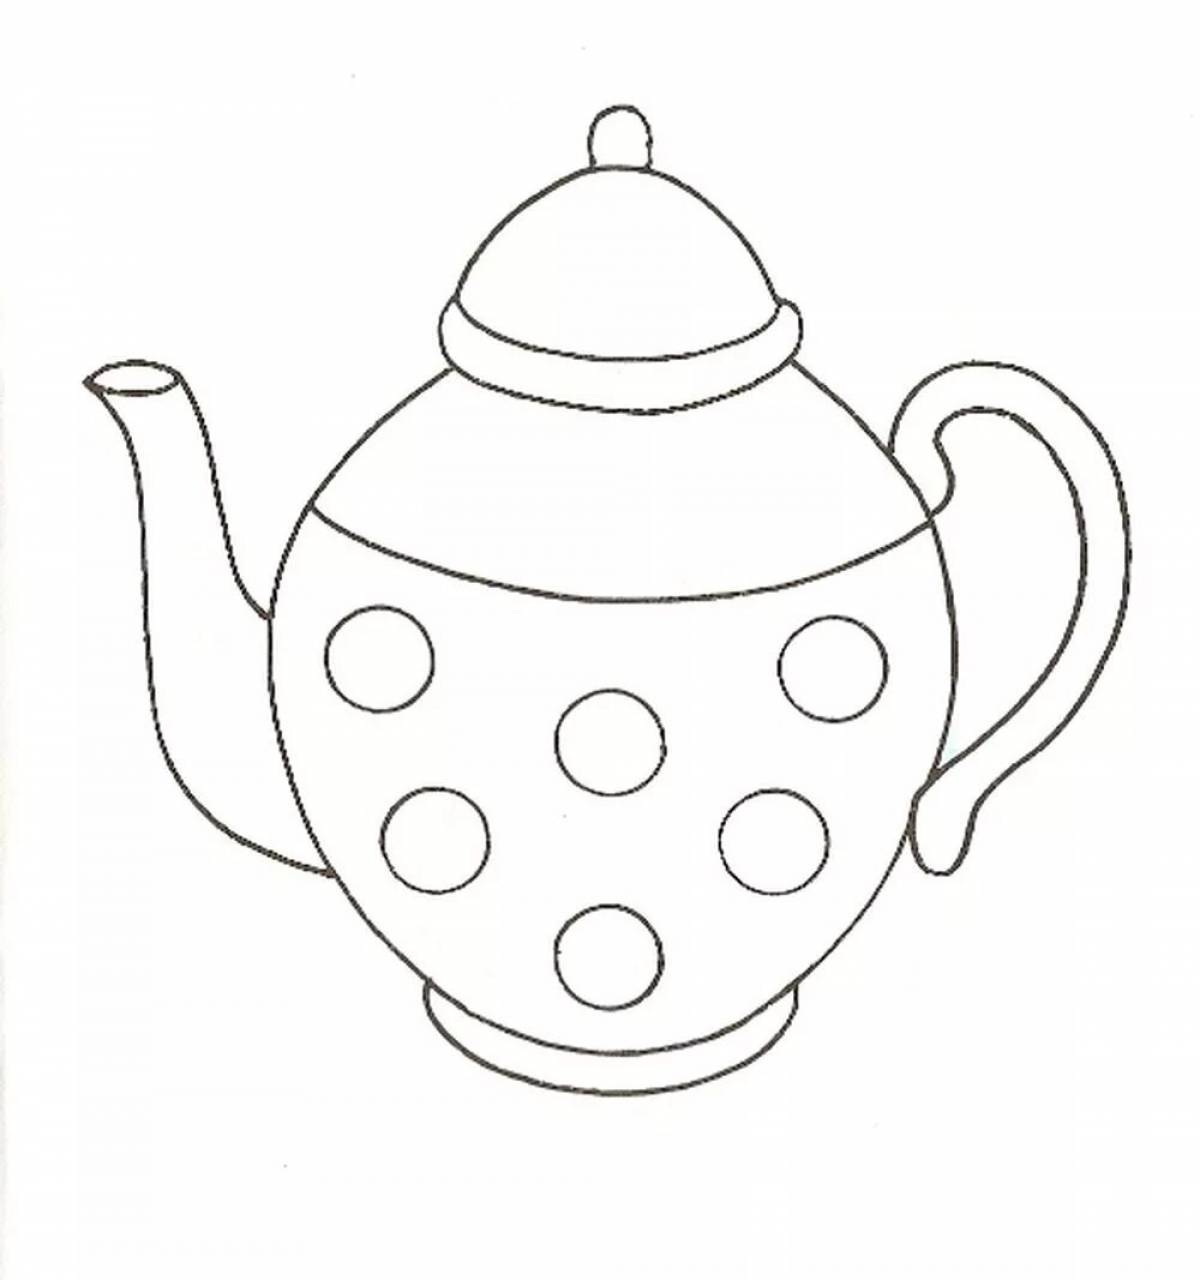 Glittering teapot coloring page for 2-3 year olds